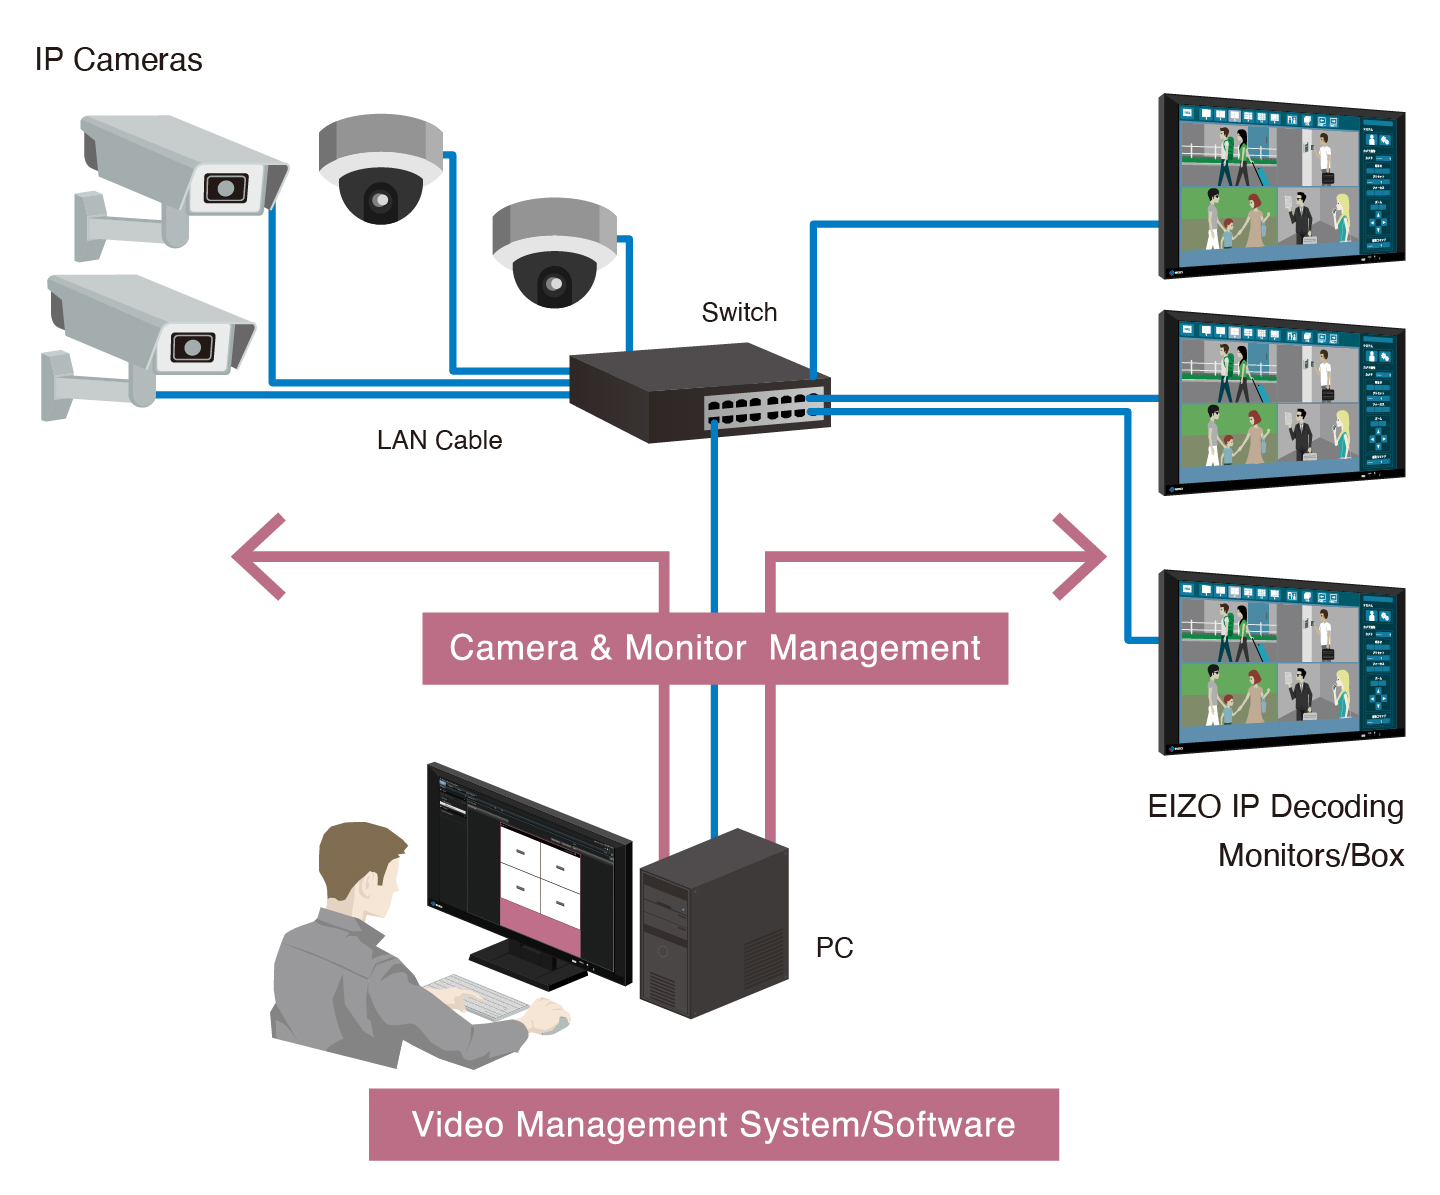 Monitors and cameras can be managed centrally through the VMS